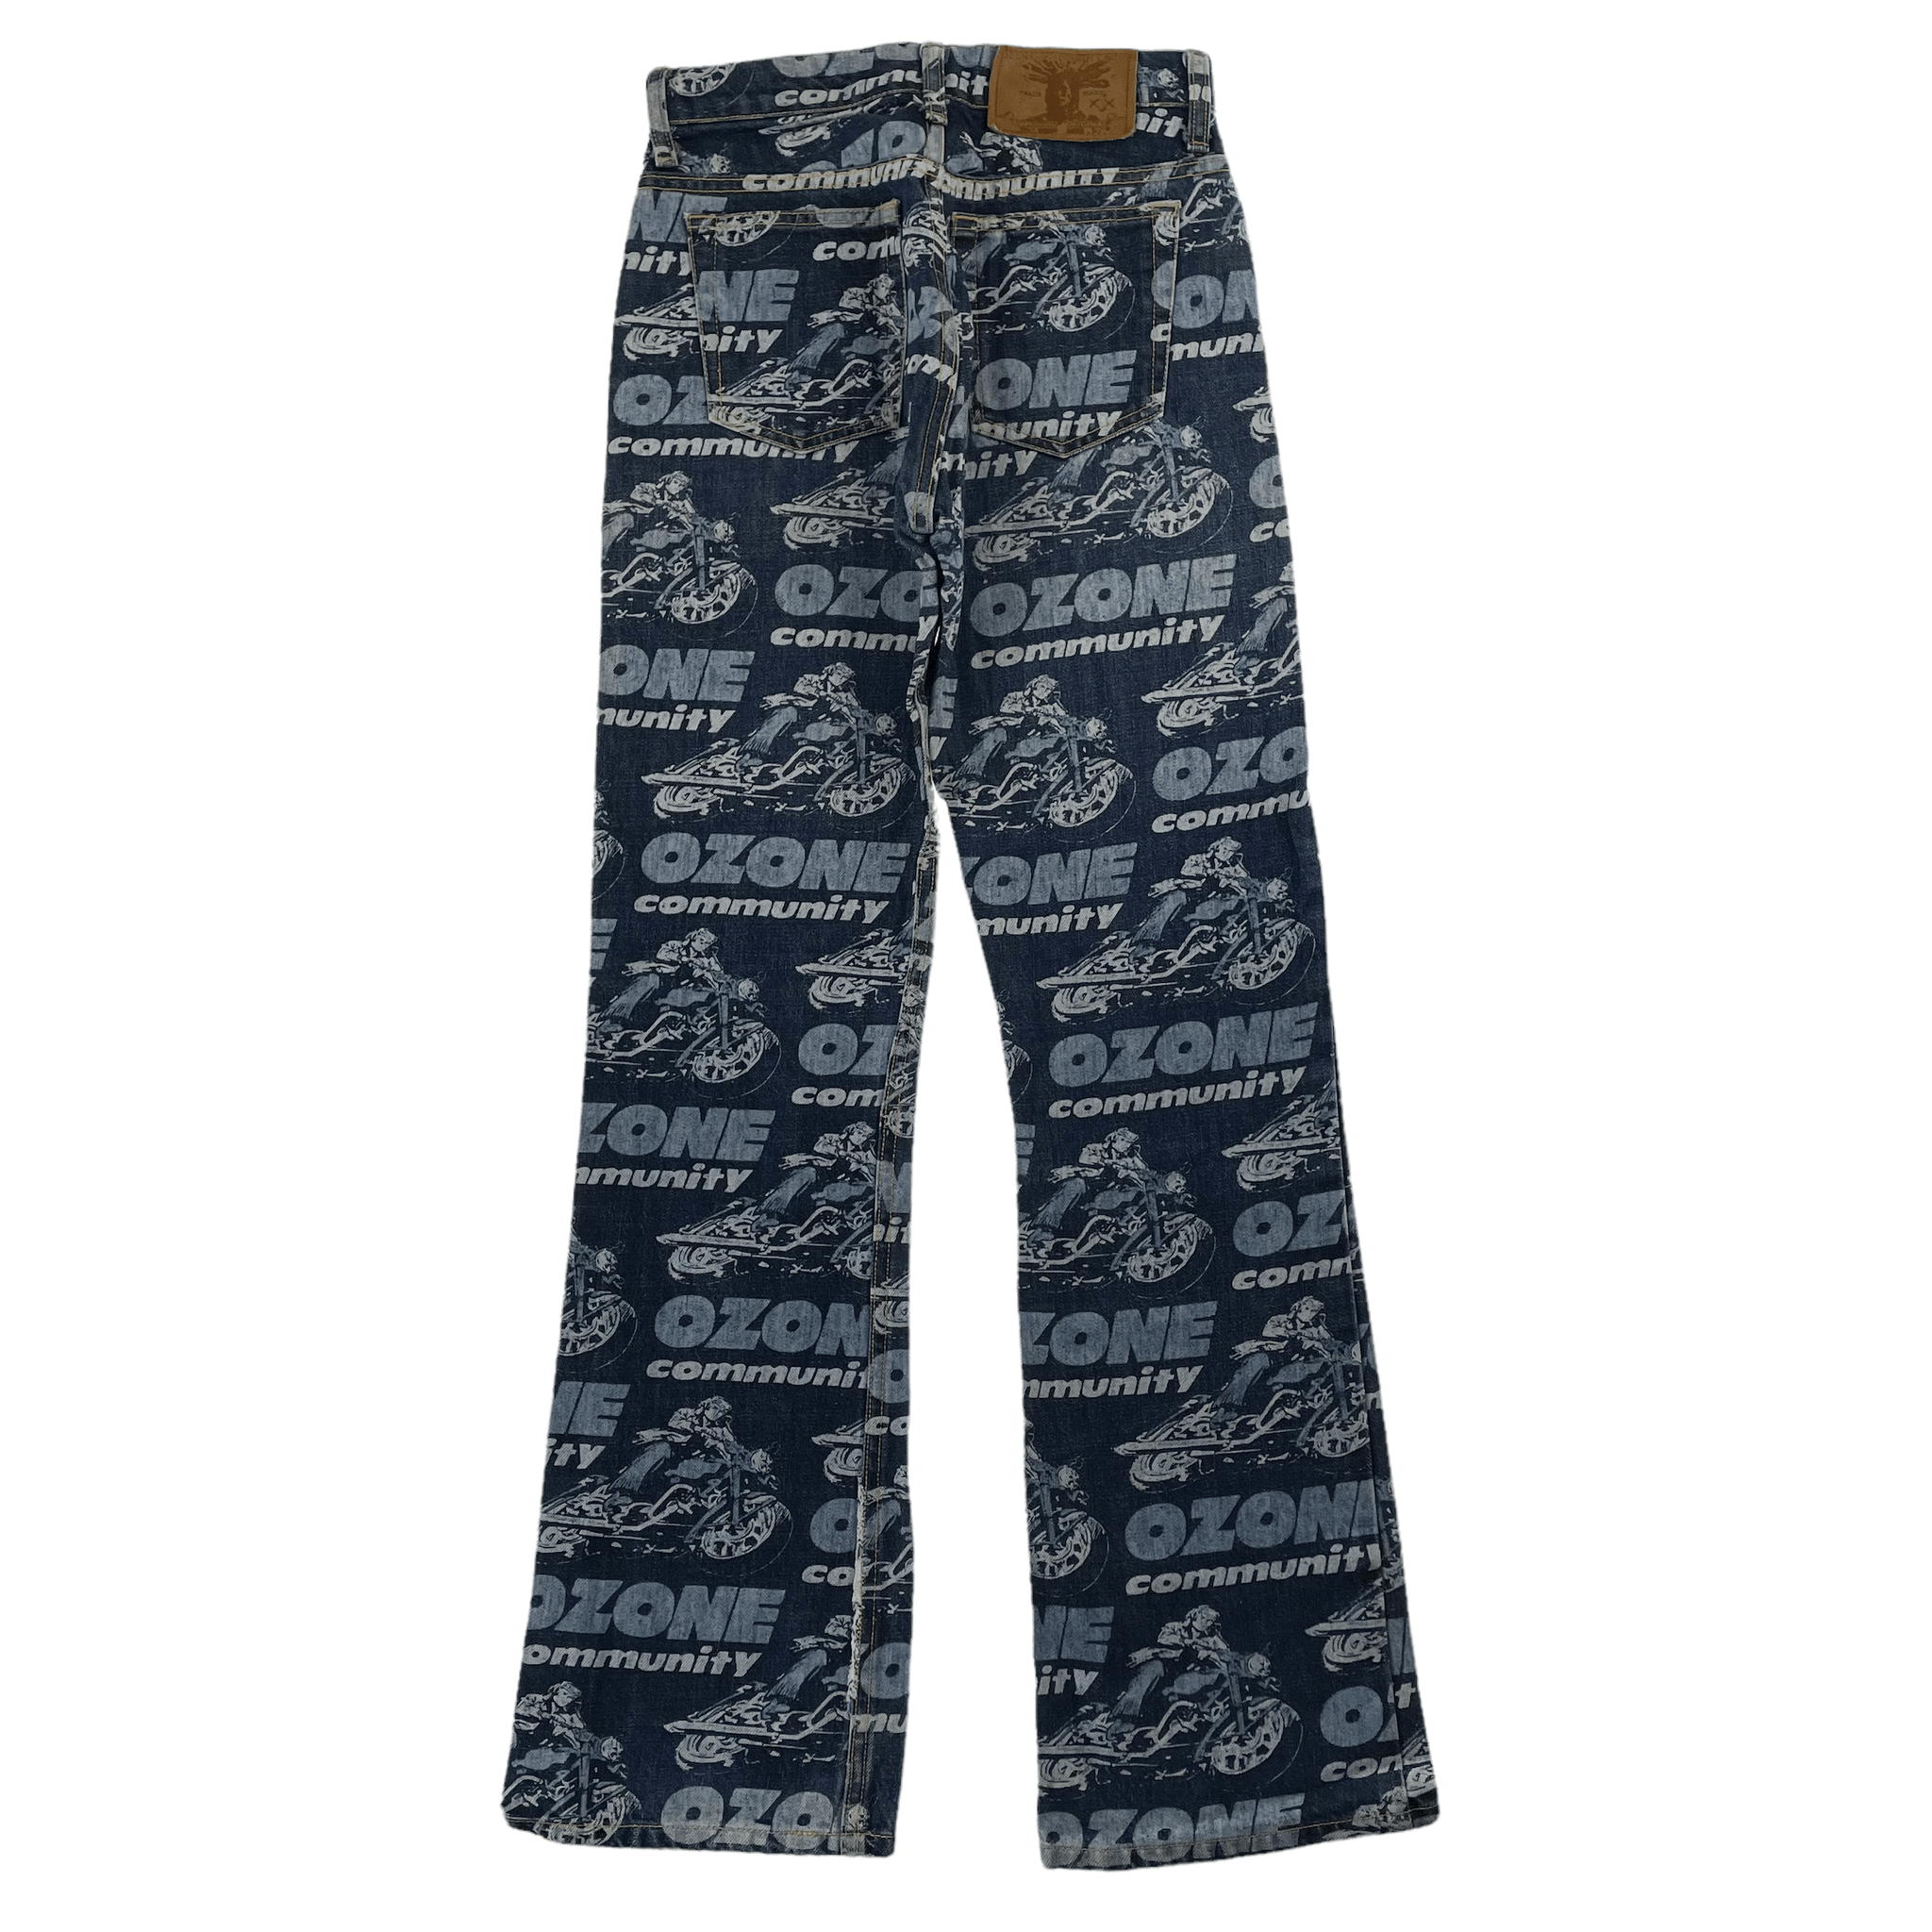 Vintage Hysteric Glamour Ozone Community denim jeans trousers W24 ...